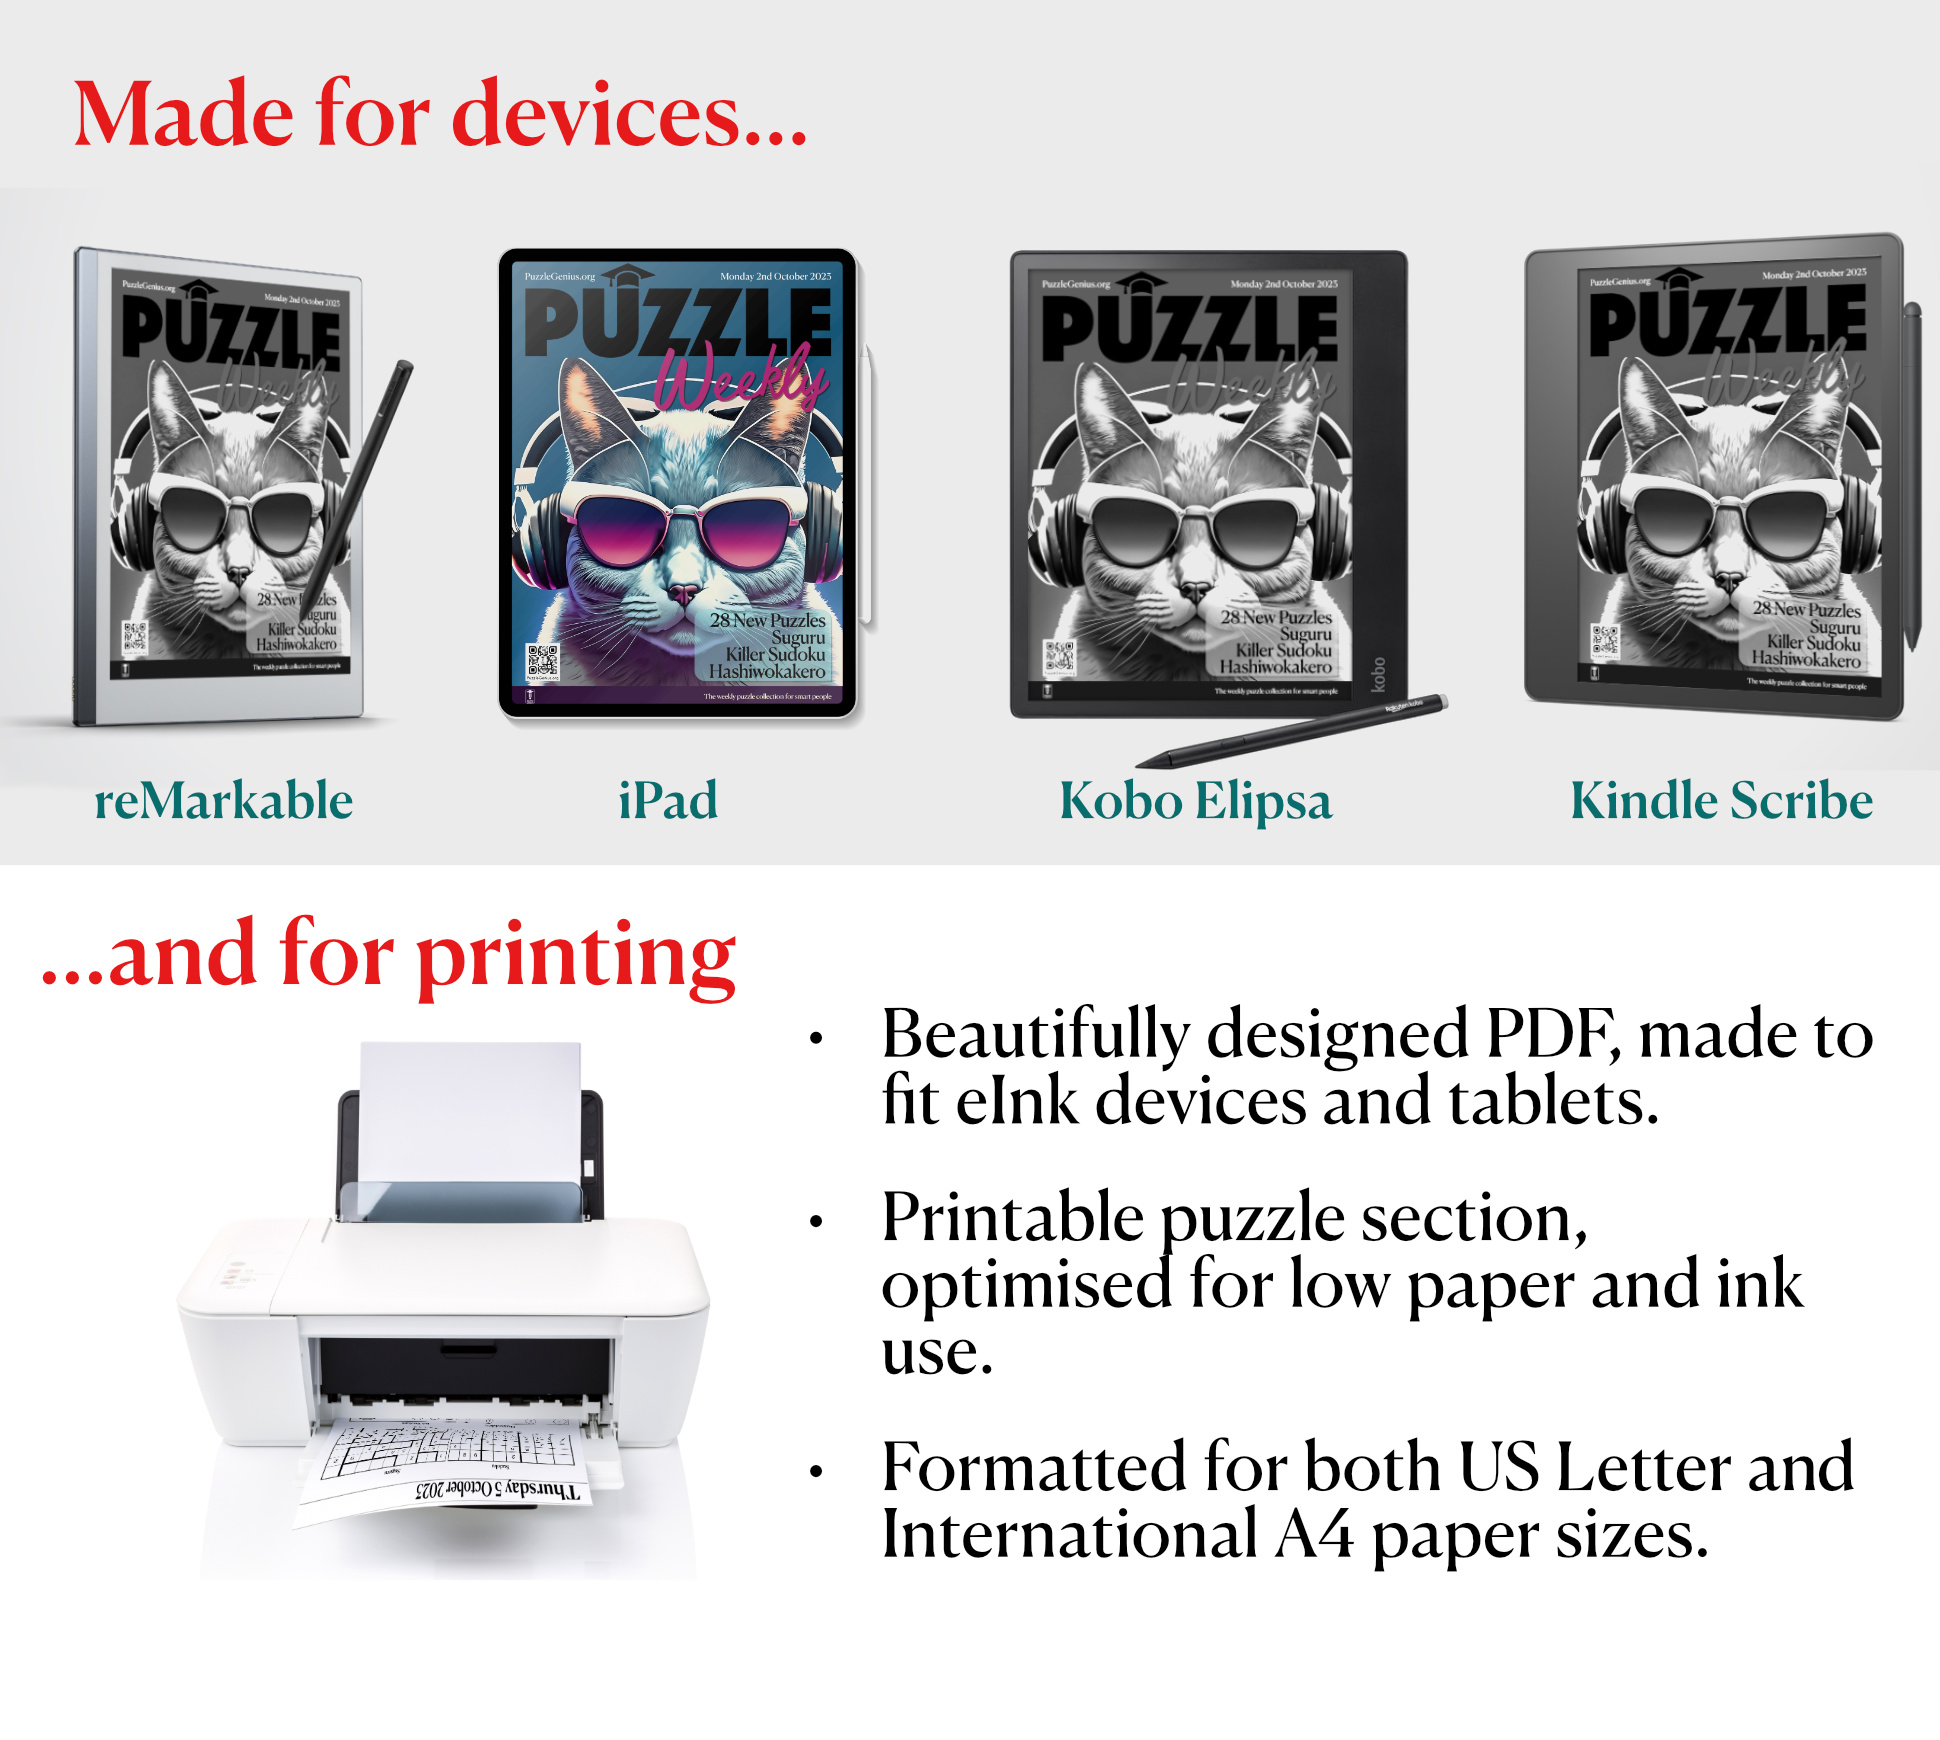 Designed for devices, and for printing